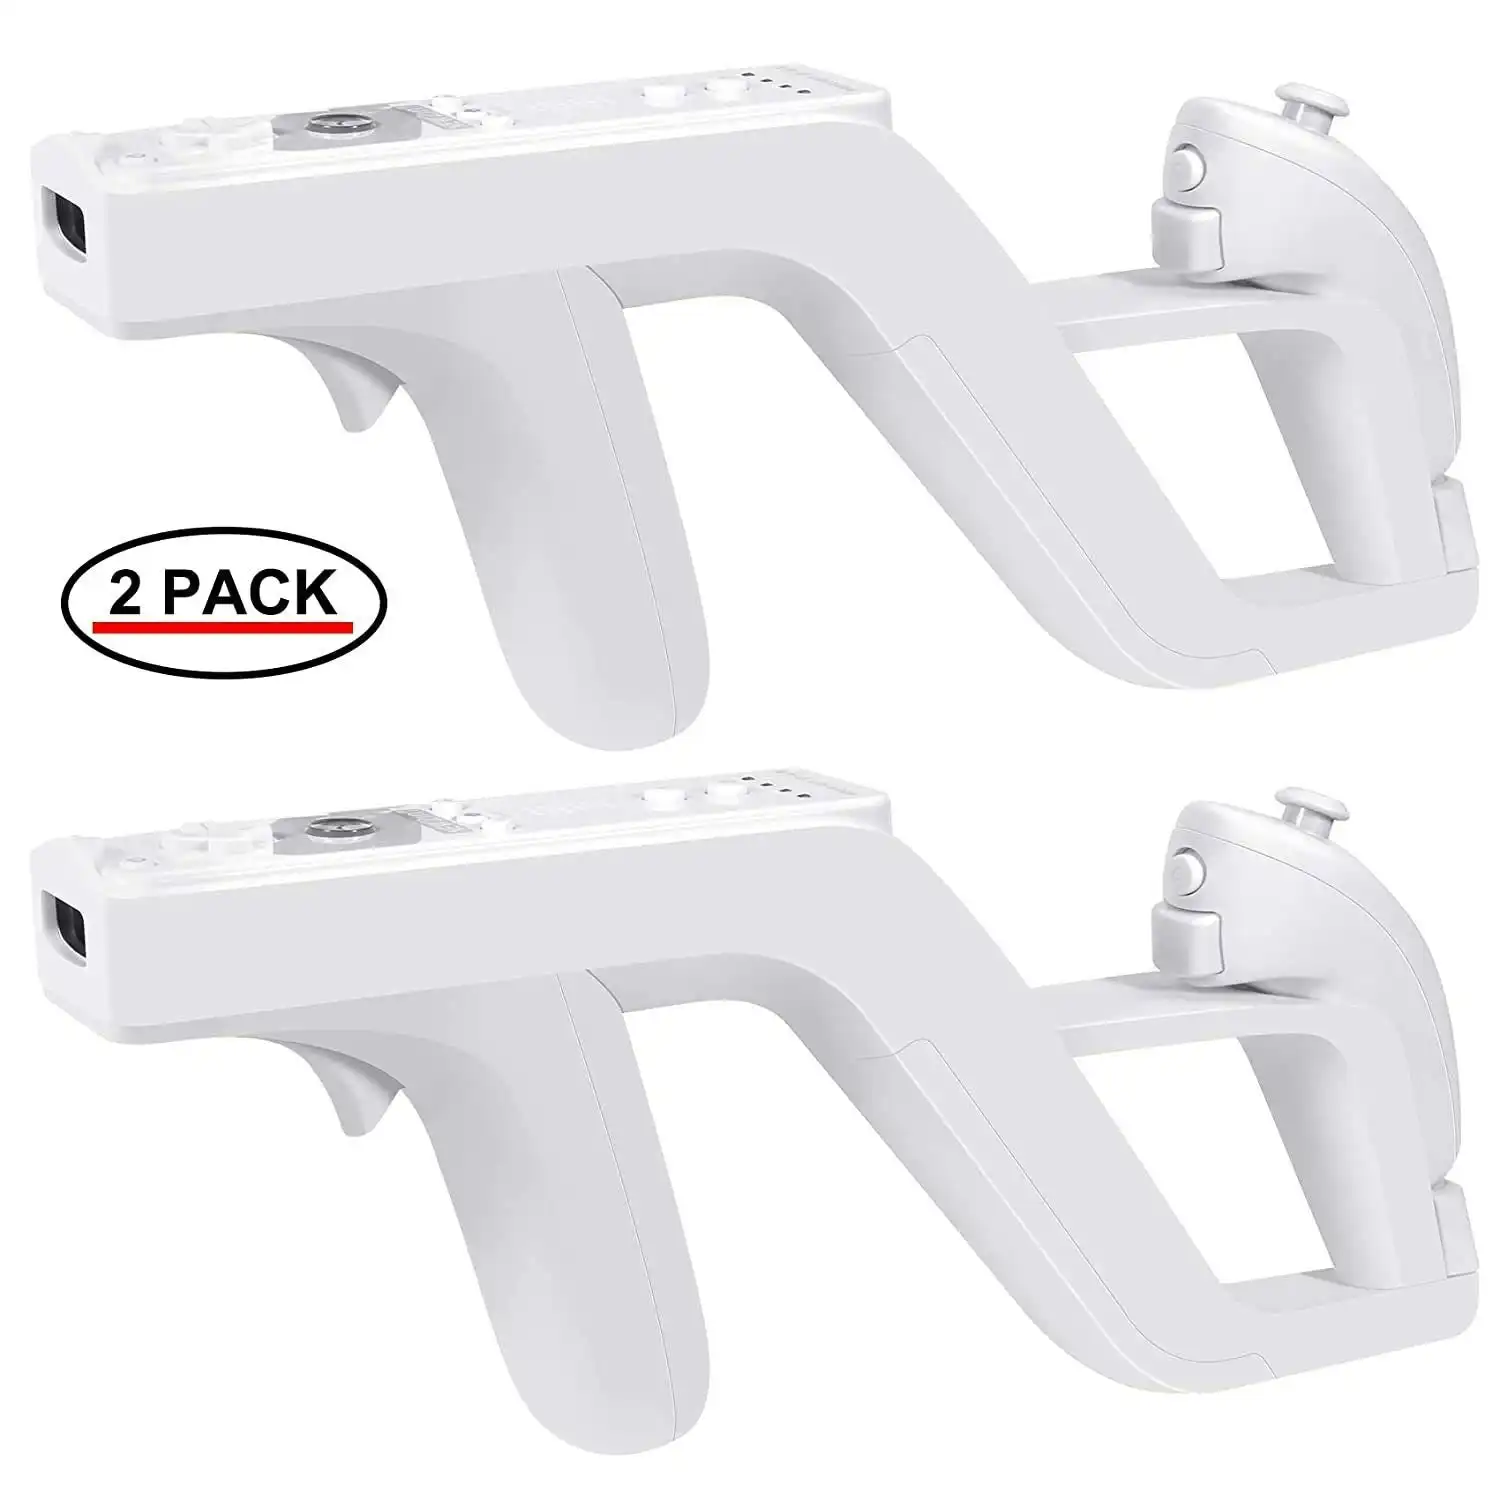 [2 Pack] Zapper Gun Compatible with Nintendo Wii Remote Wiimote Controller